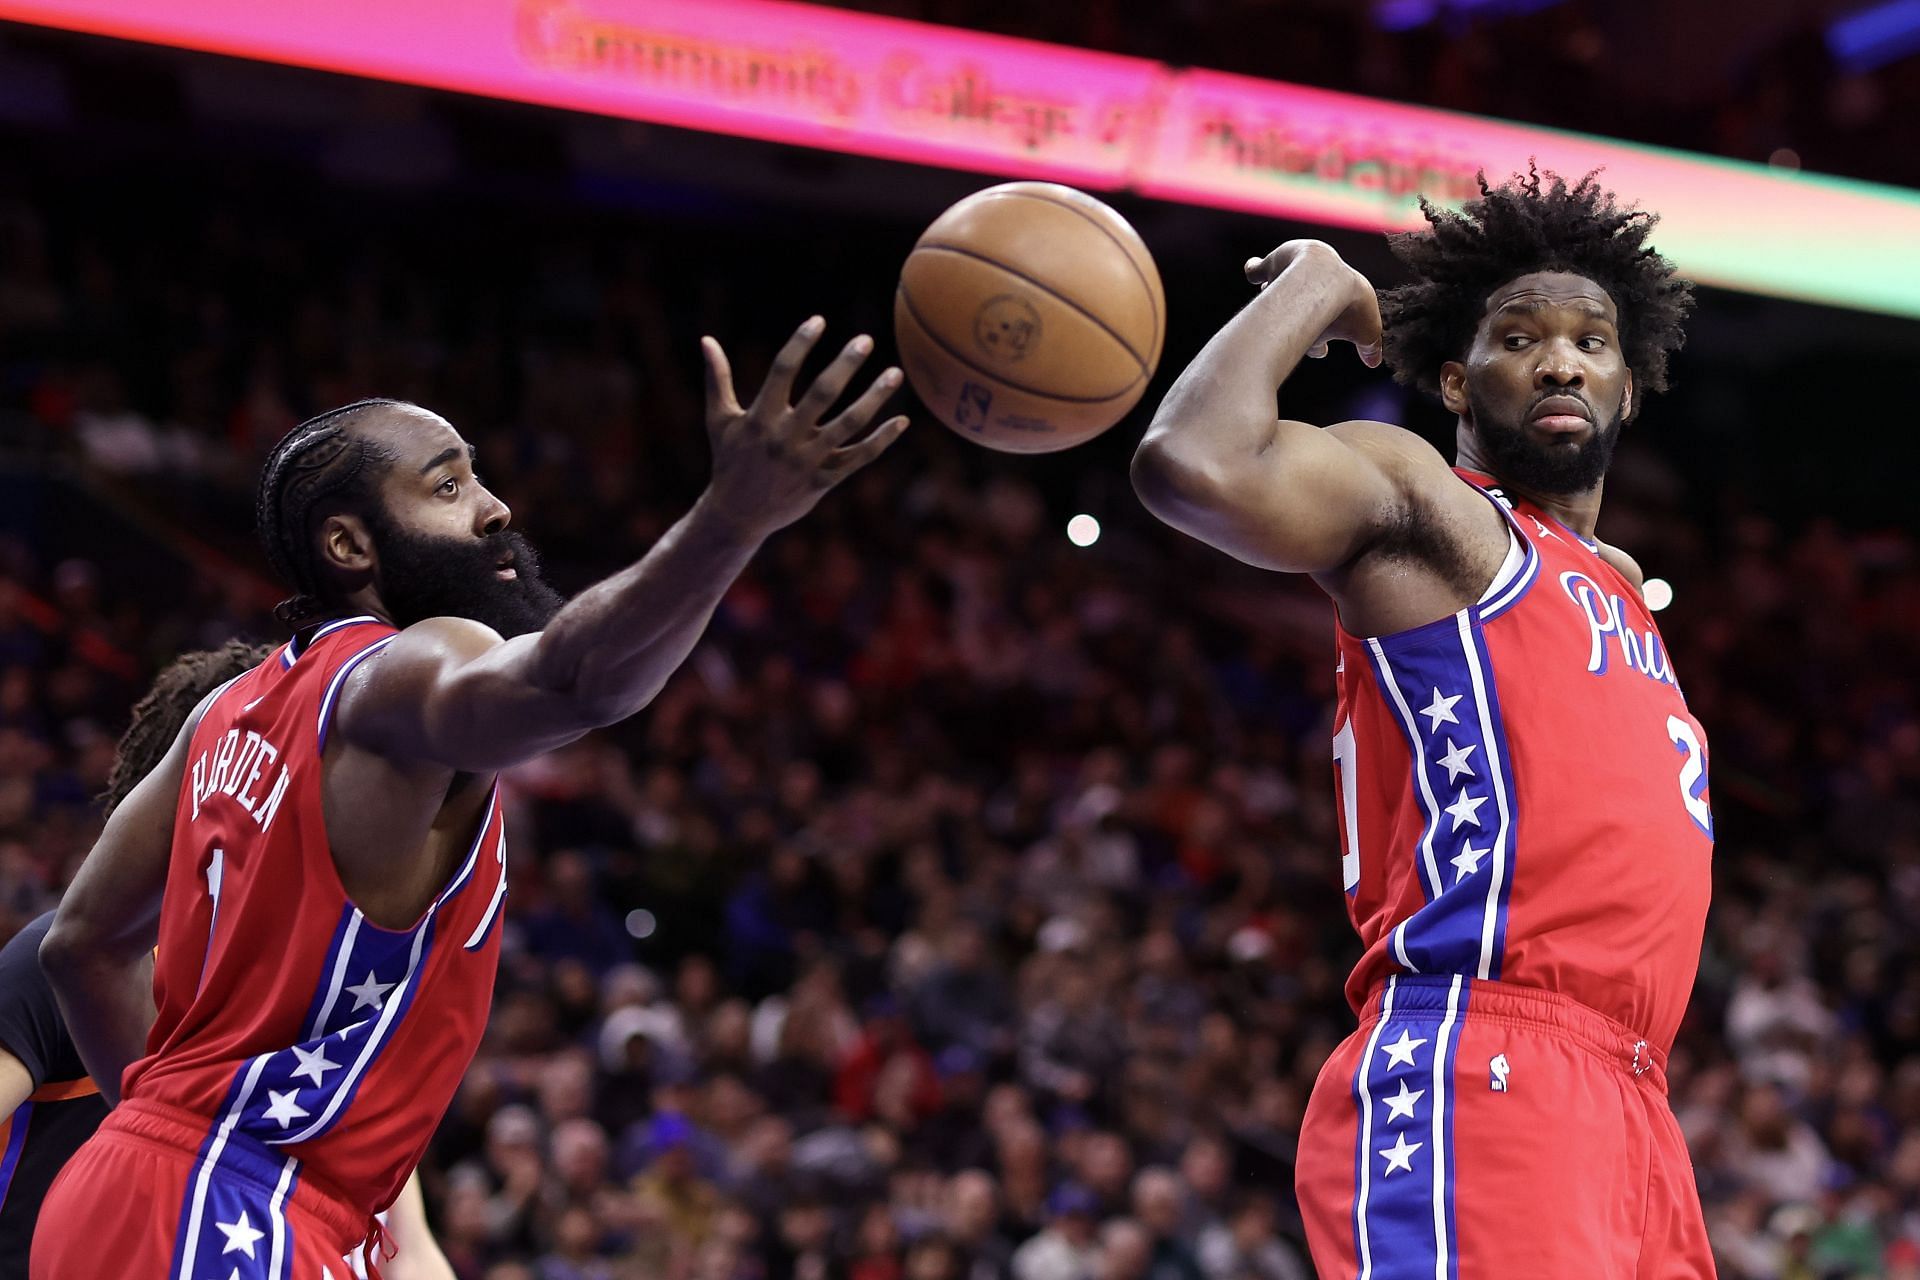 James Harden and Joel Embiid (right) of the Philadelphia 76ers